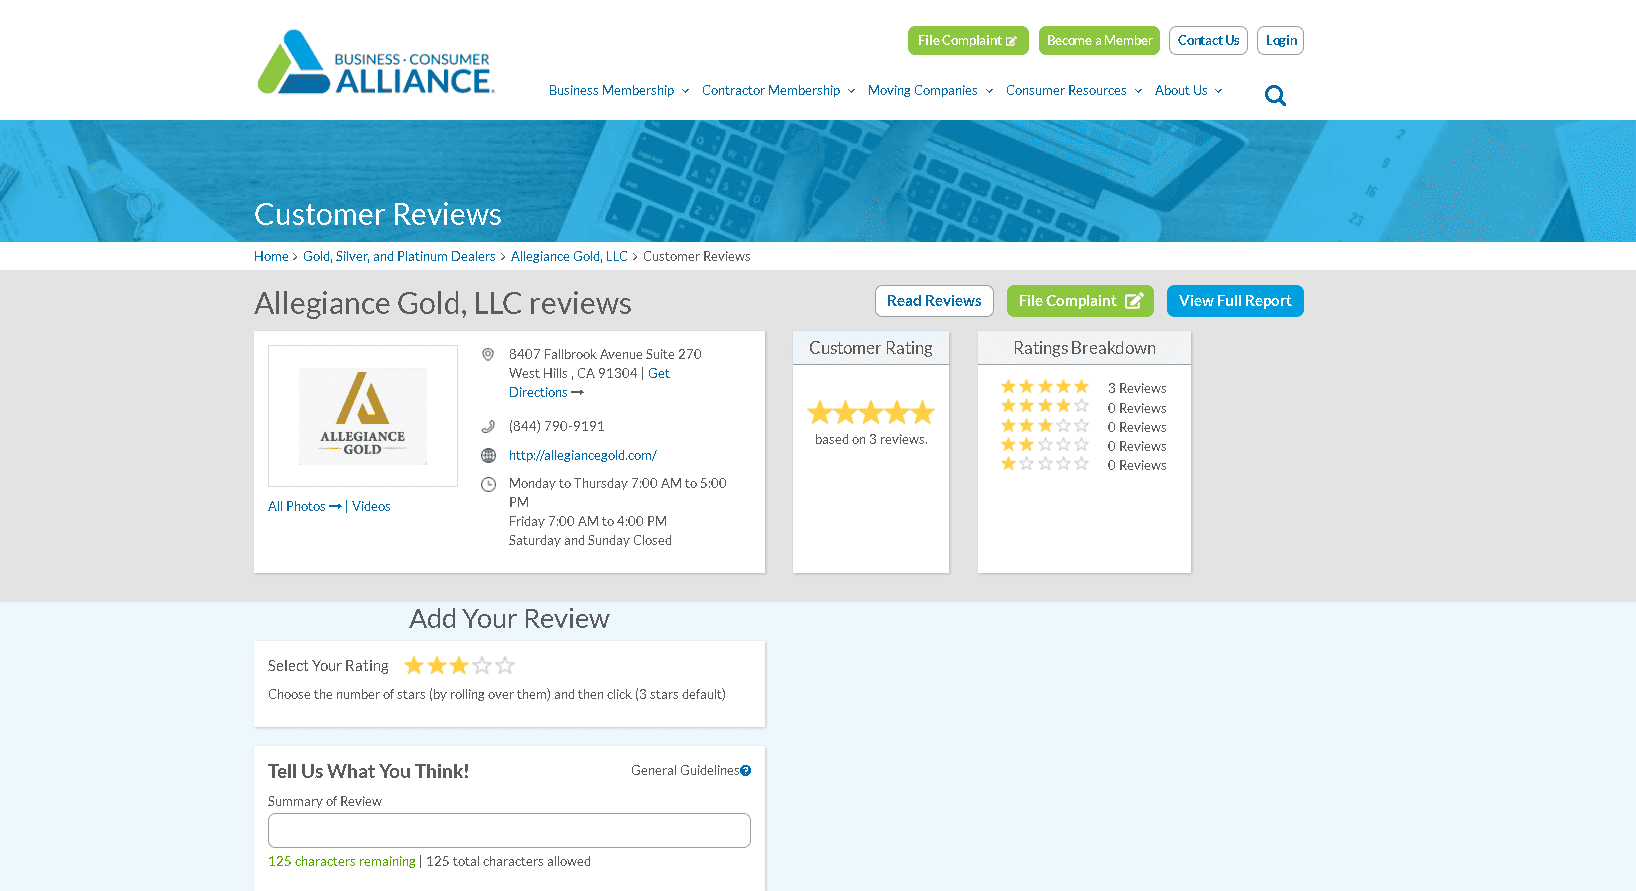 Allegiance Gold Business Consumer Alliance profile and customer reviews